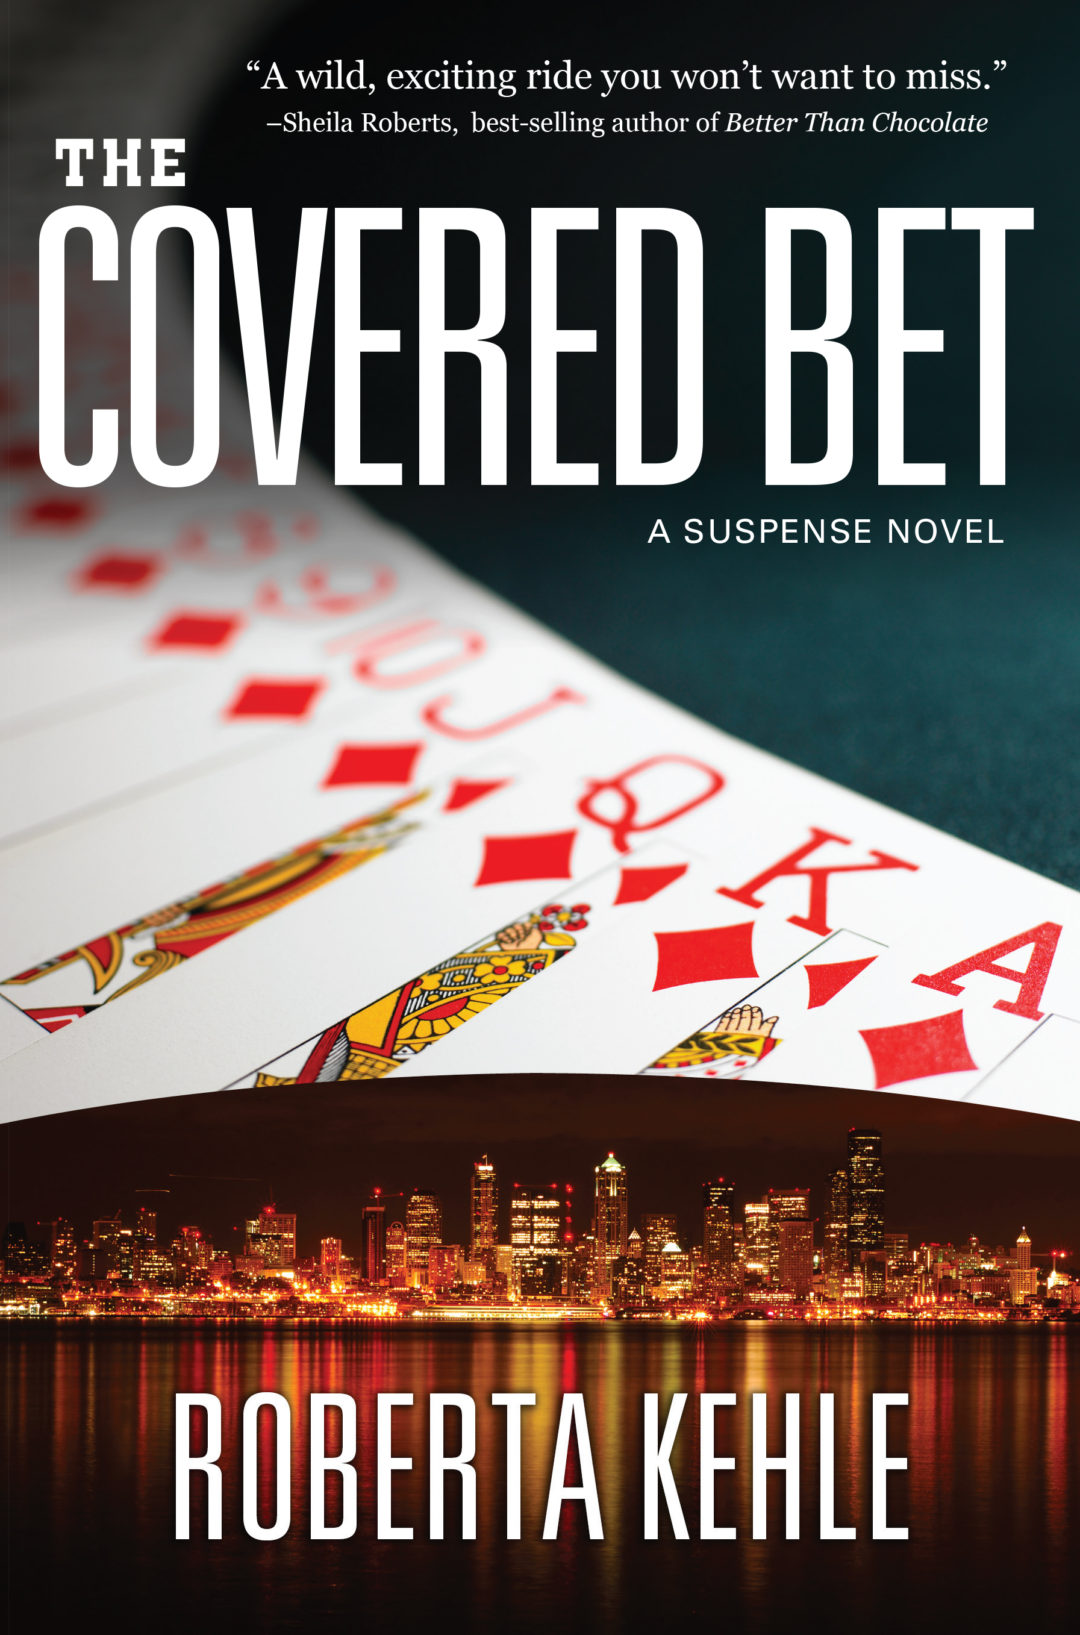 The Covered Bet